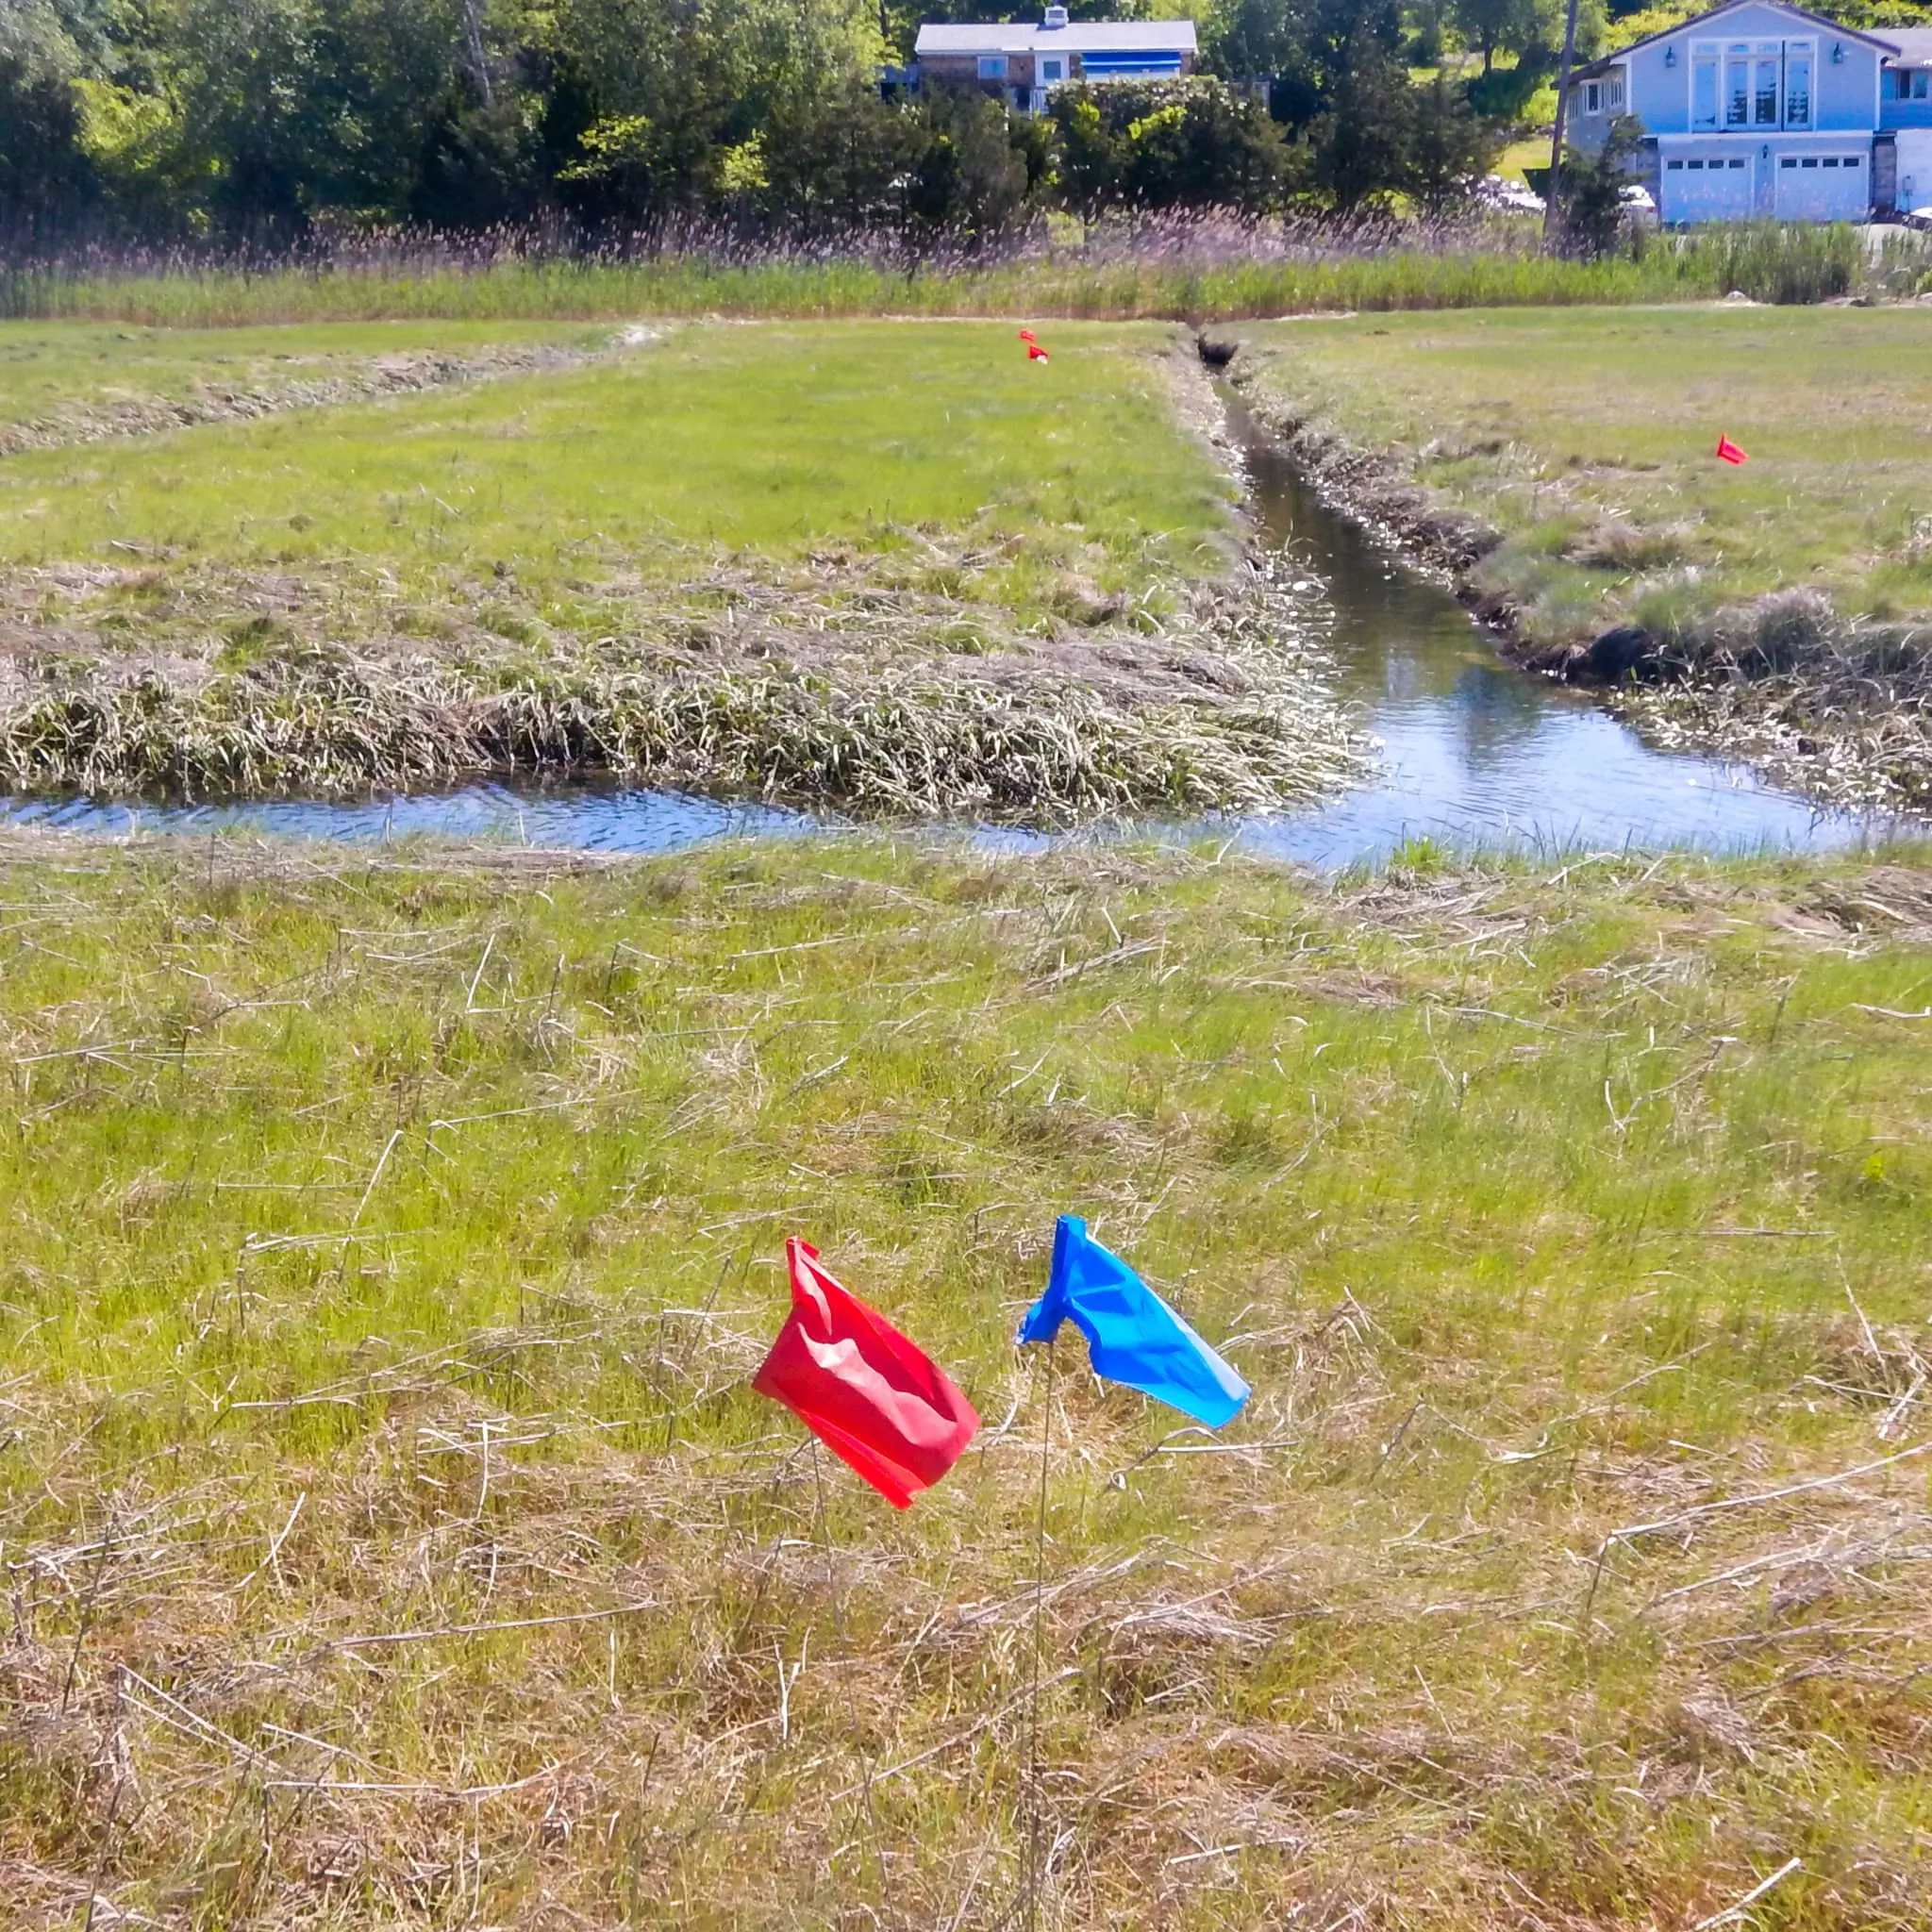 A salt marsh with ditches, with a house in the background.